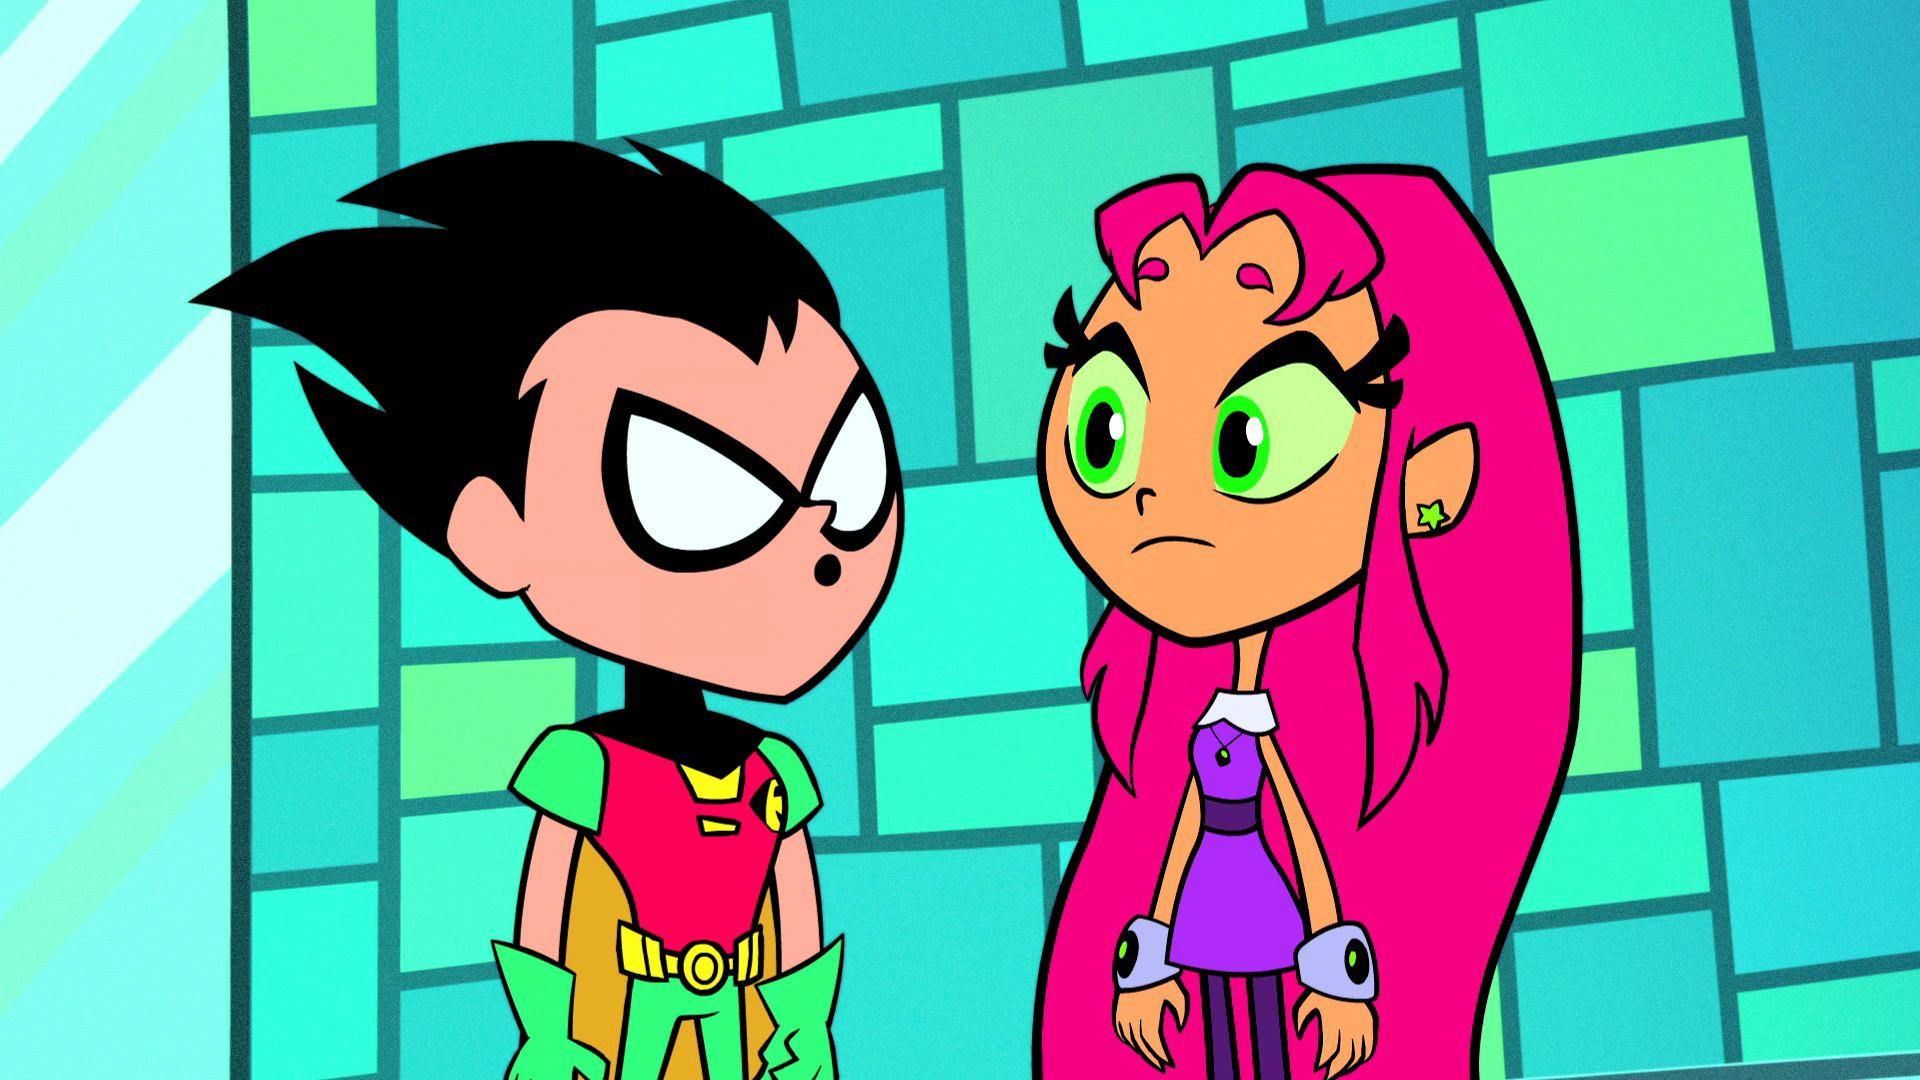 Teen Titans Go!&; Episode 3 Clips and Image